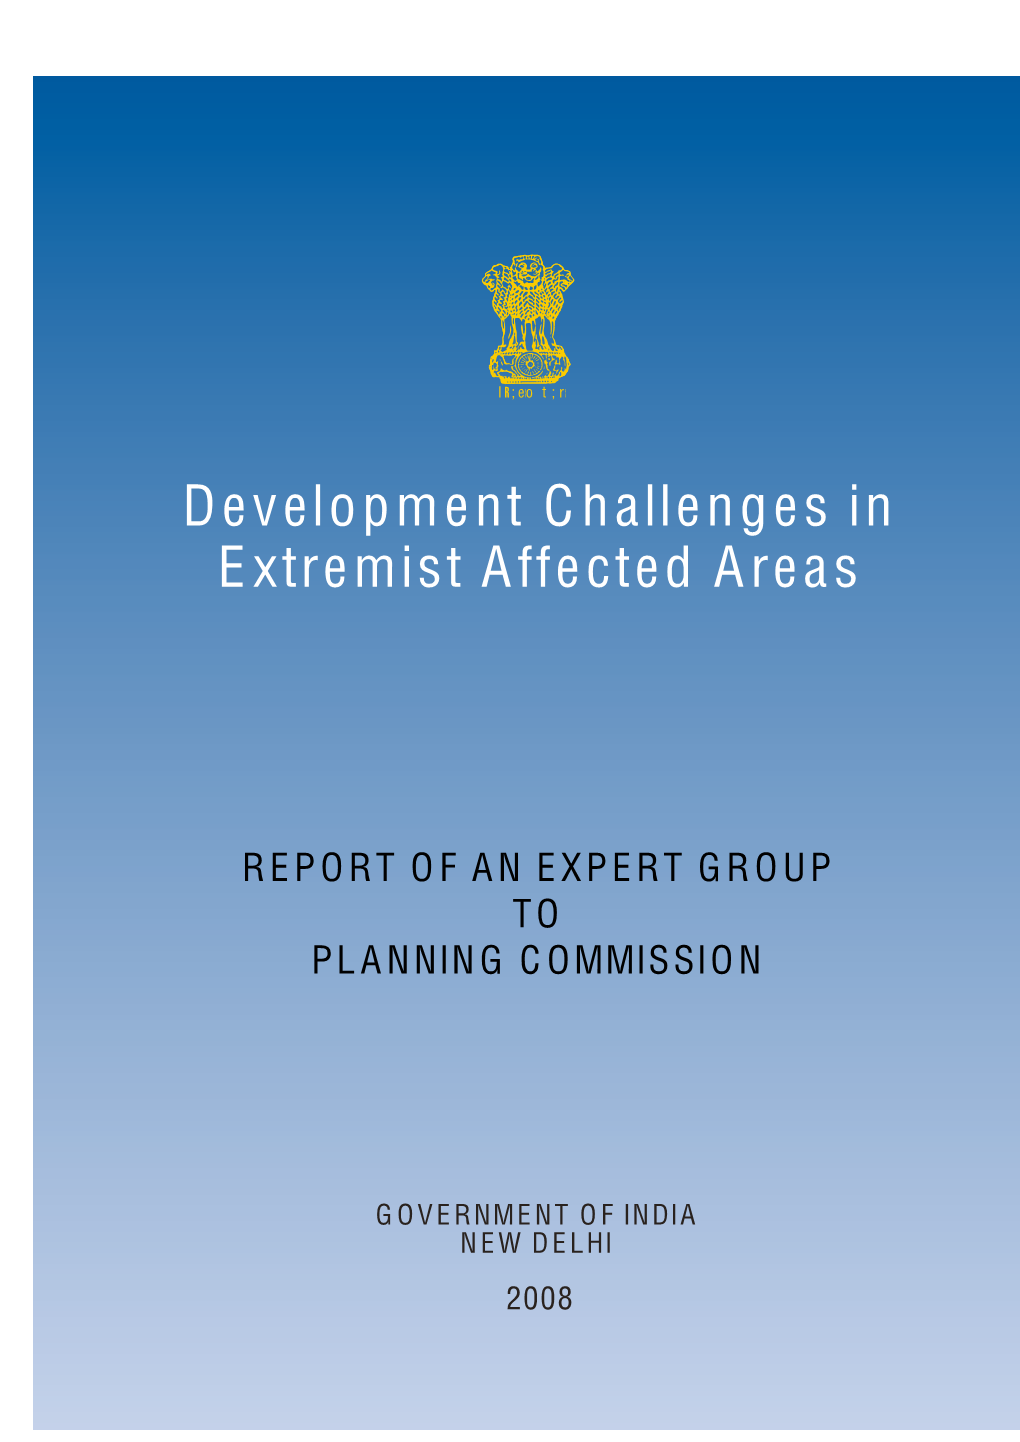 Development Challenges in Extremist Affected Areas